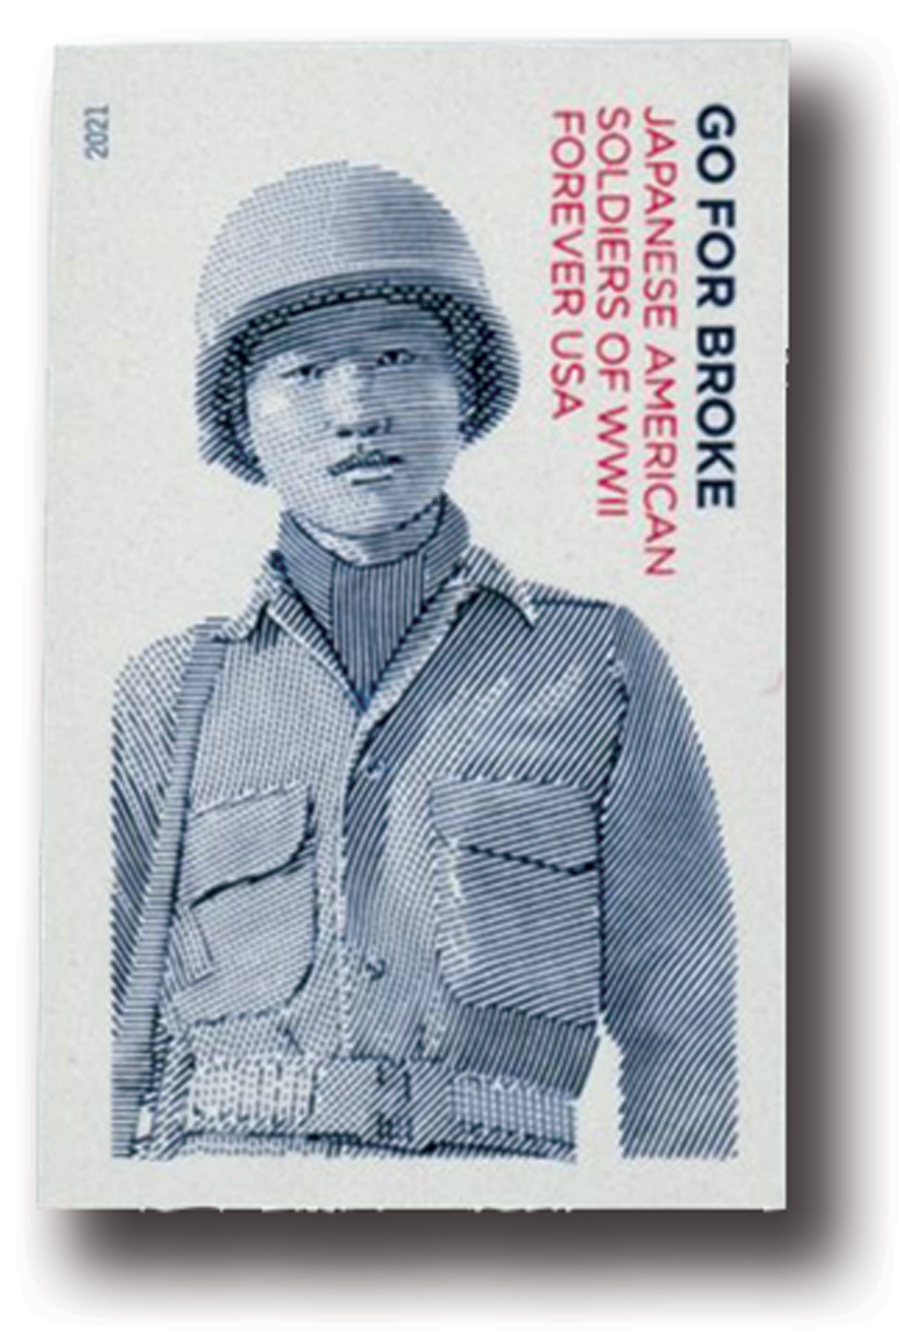 2021 55Â¢ Imperforate Go For Broke: Japanese Soldiers of World War II